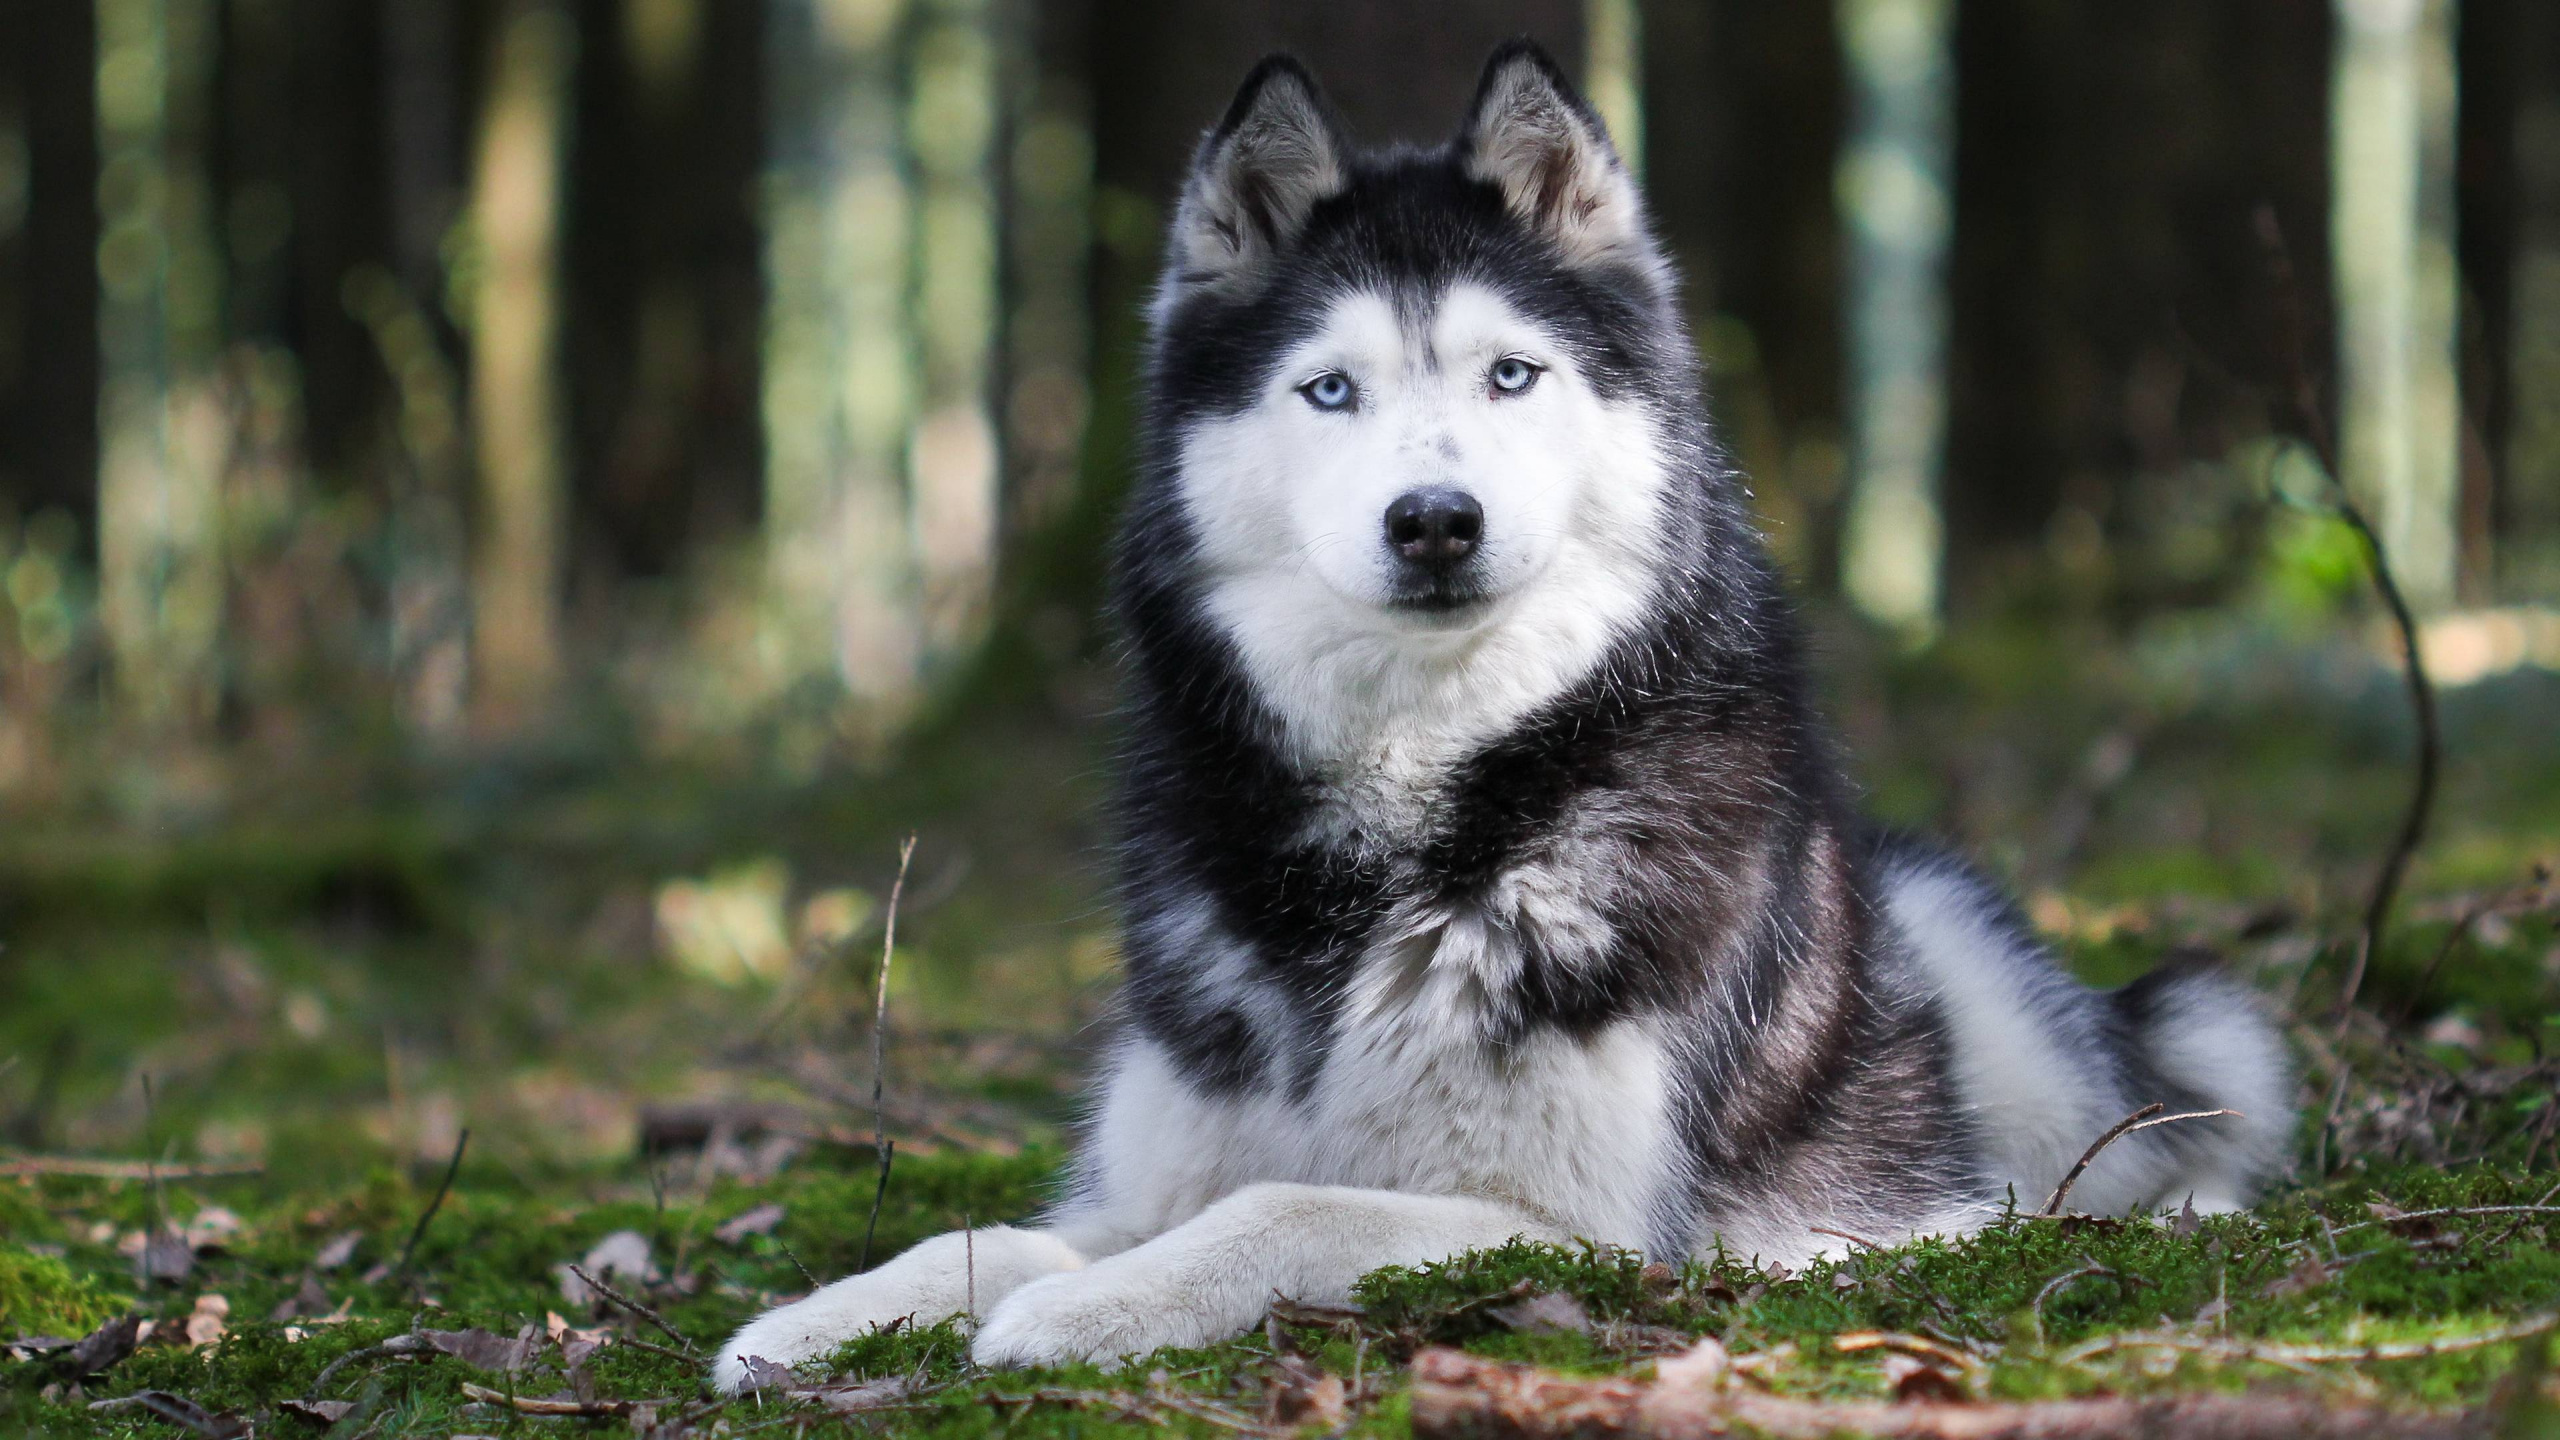 Black and White Siberian Husky Lying on Green Grass During Daytime. Wallpaper in 2560x1440 Resolution